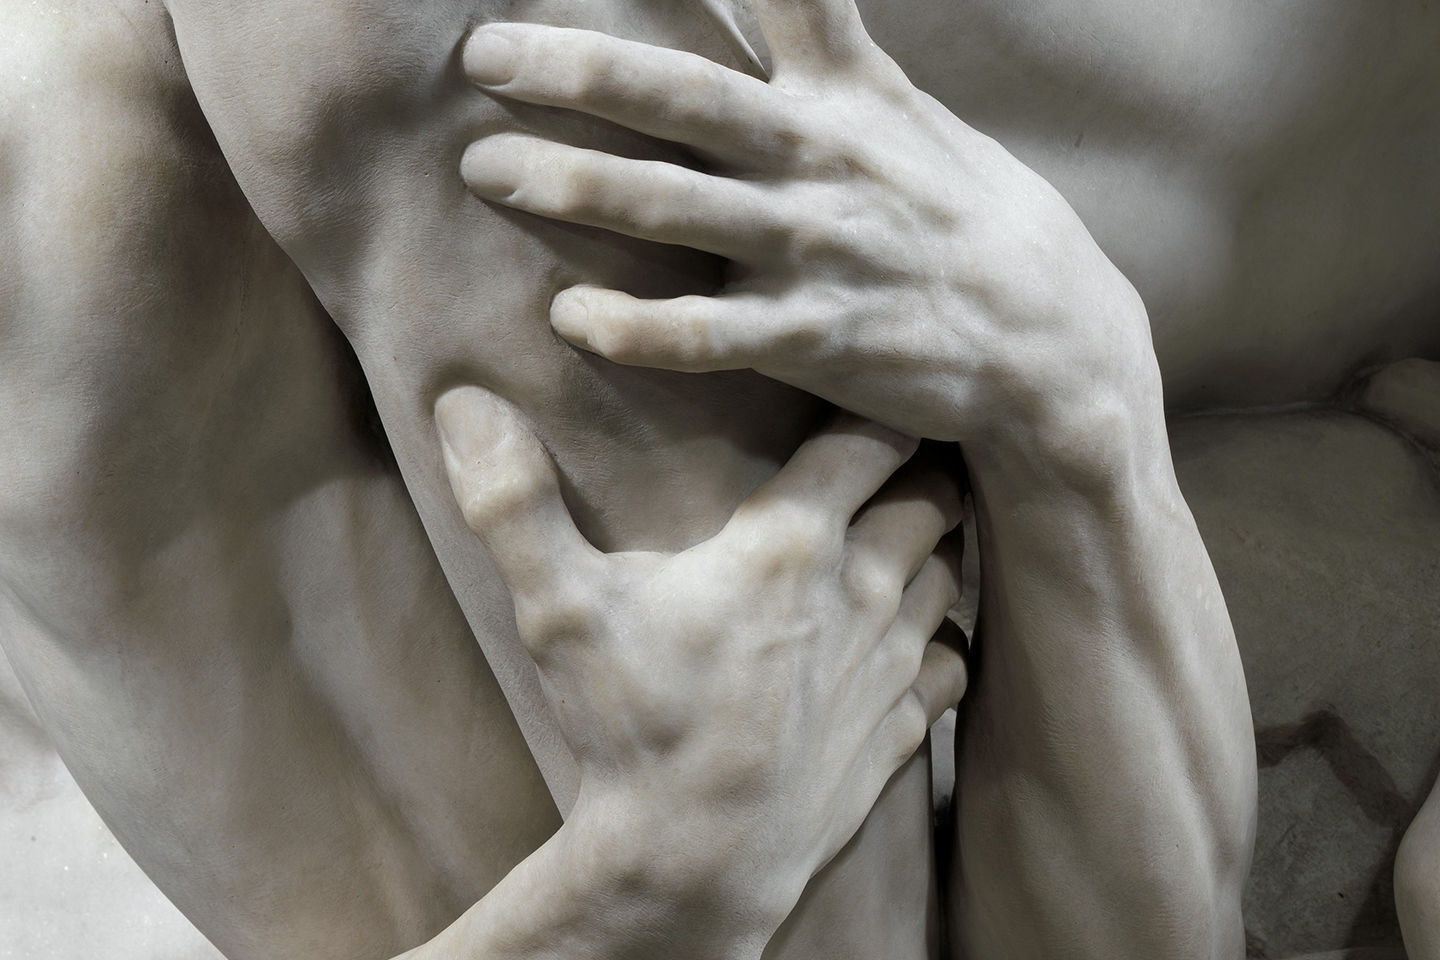 A close up view of a carved marble sculpture depicting muscular hands wrapping around and gripping a figure’s leg to the side of the knee cap.